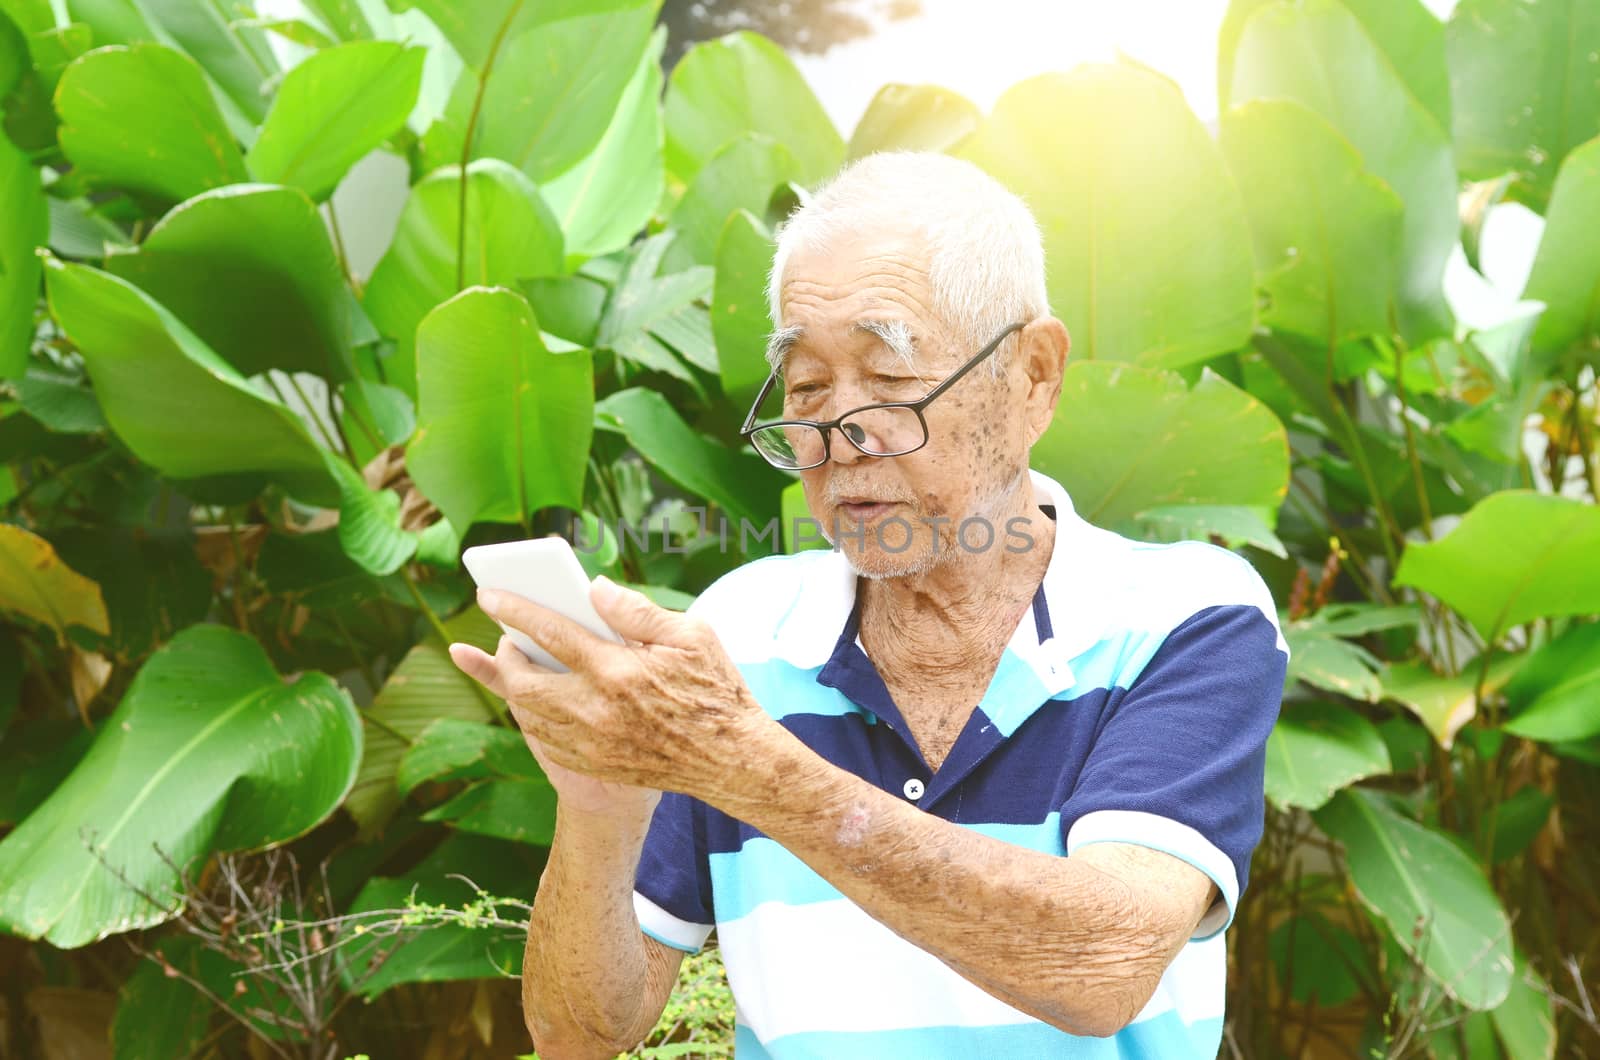 Modern technology, age and people concept. Asian Senior man using smart-phone at garden.